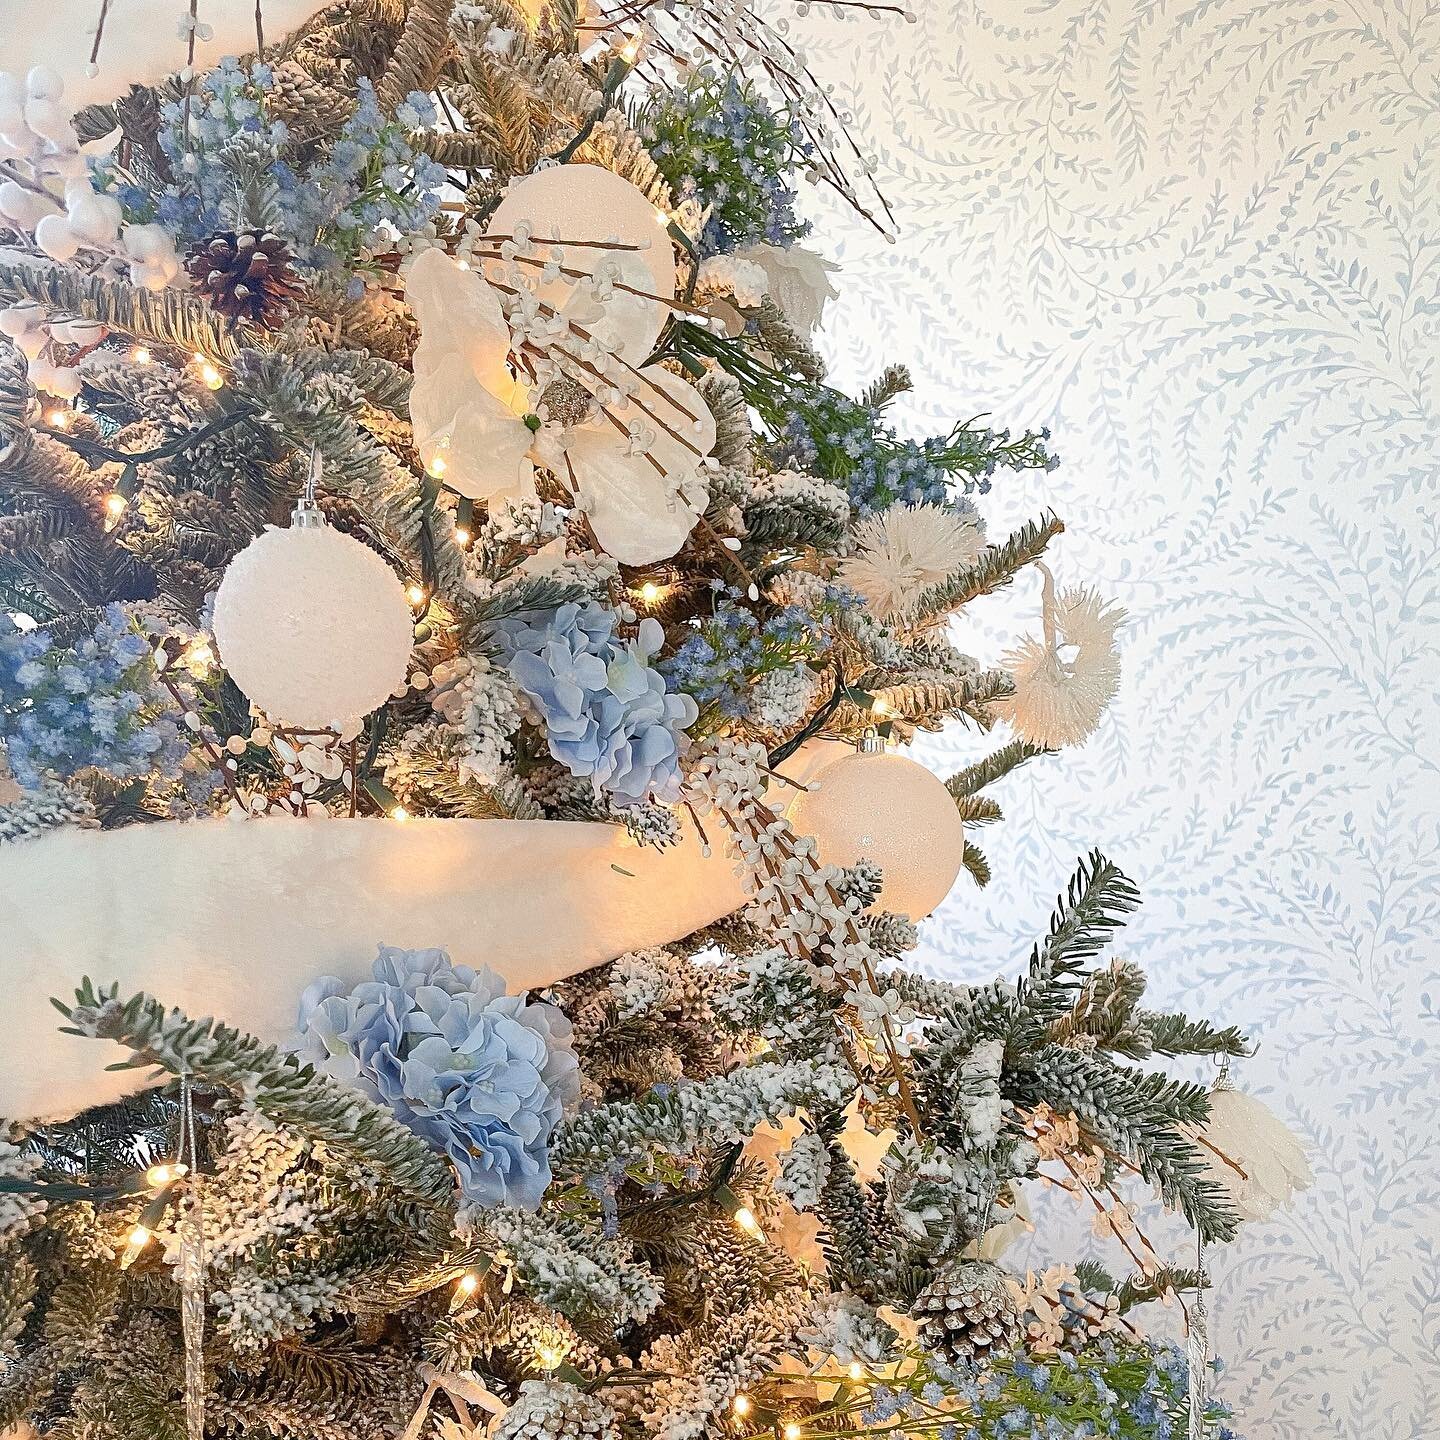 Adding blue this year to the tree to coordinate with my @serenaandlily wallpaper ! Im loving it! Still need to add some finishing touches but its coming along!  My husband was teasing me and said &quot; nothing says Christmas like light blue &quot; ?